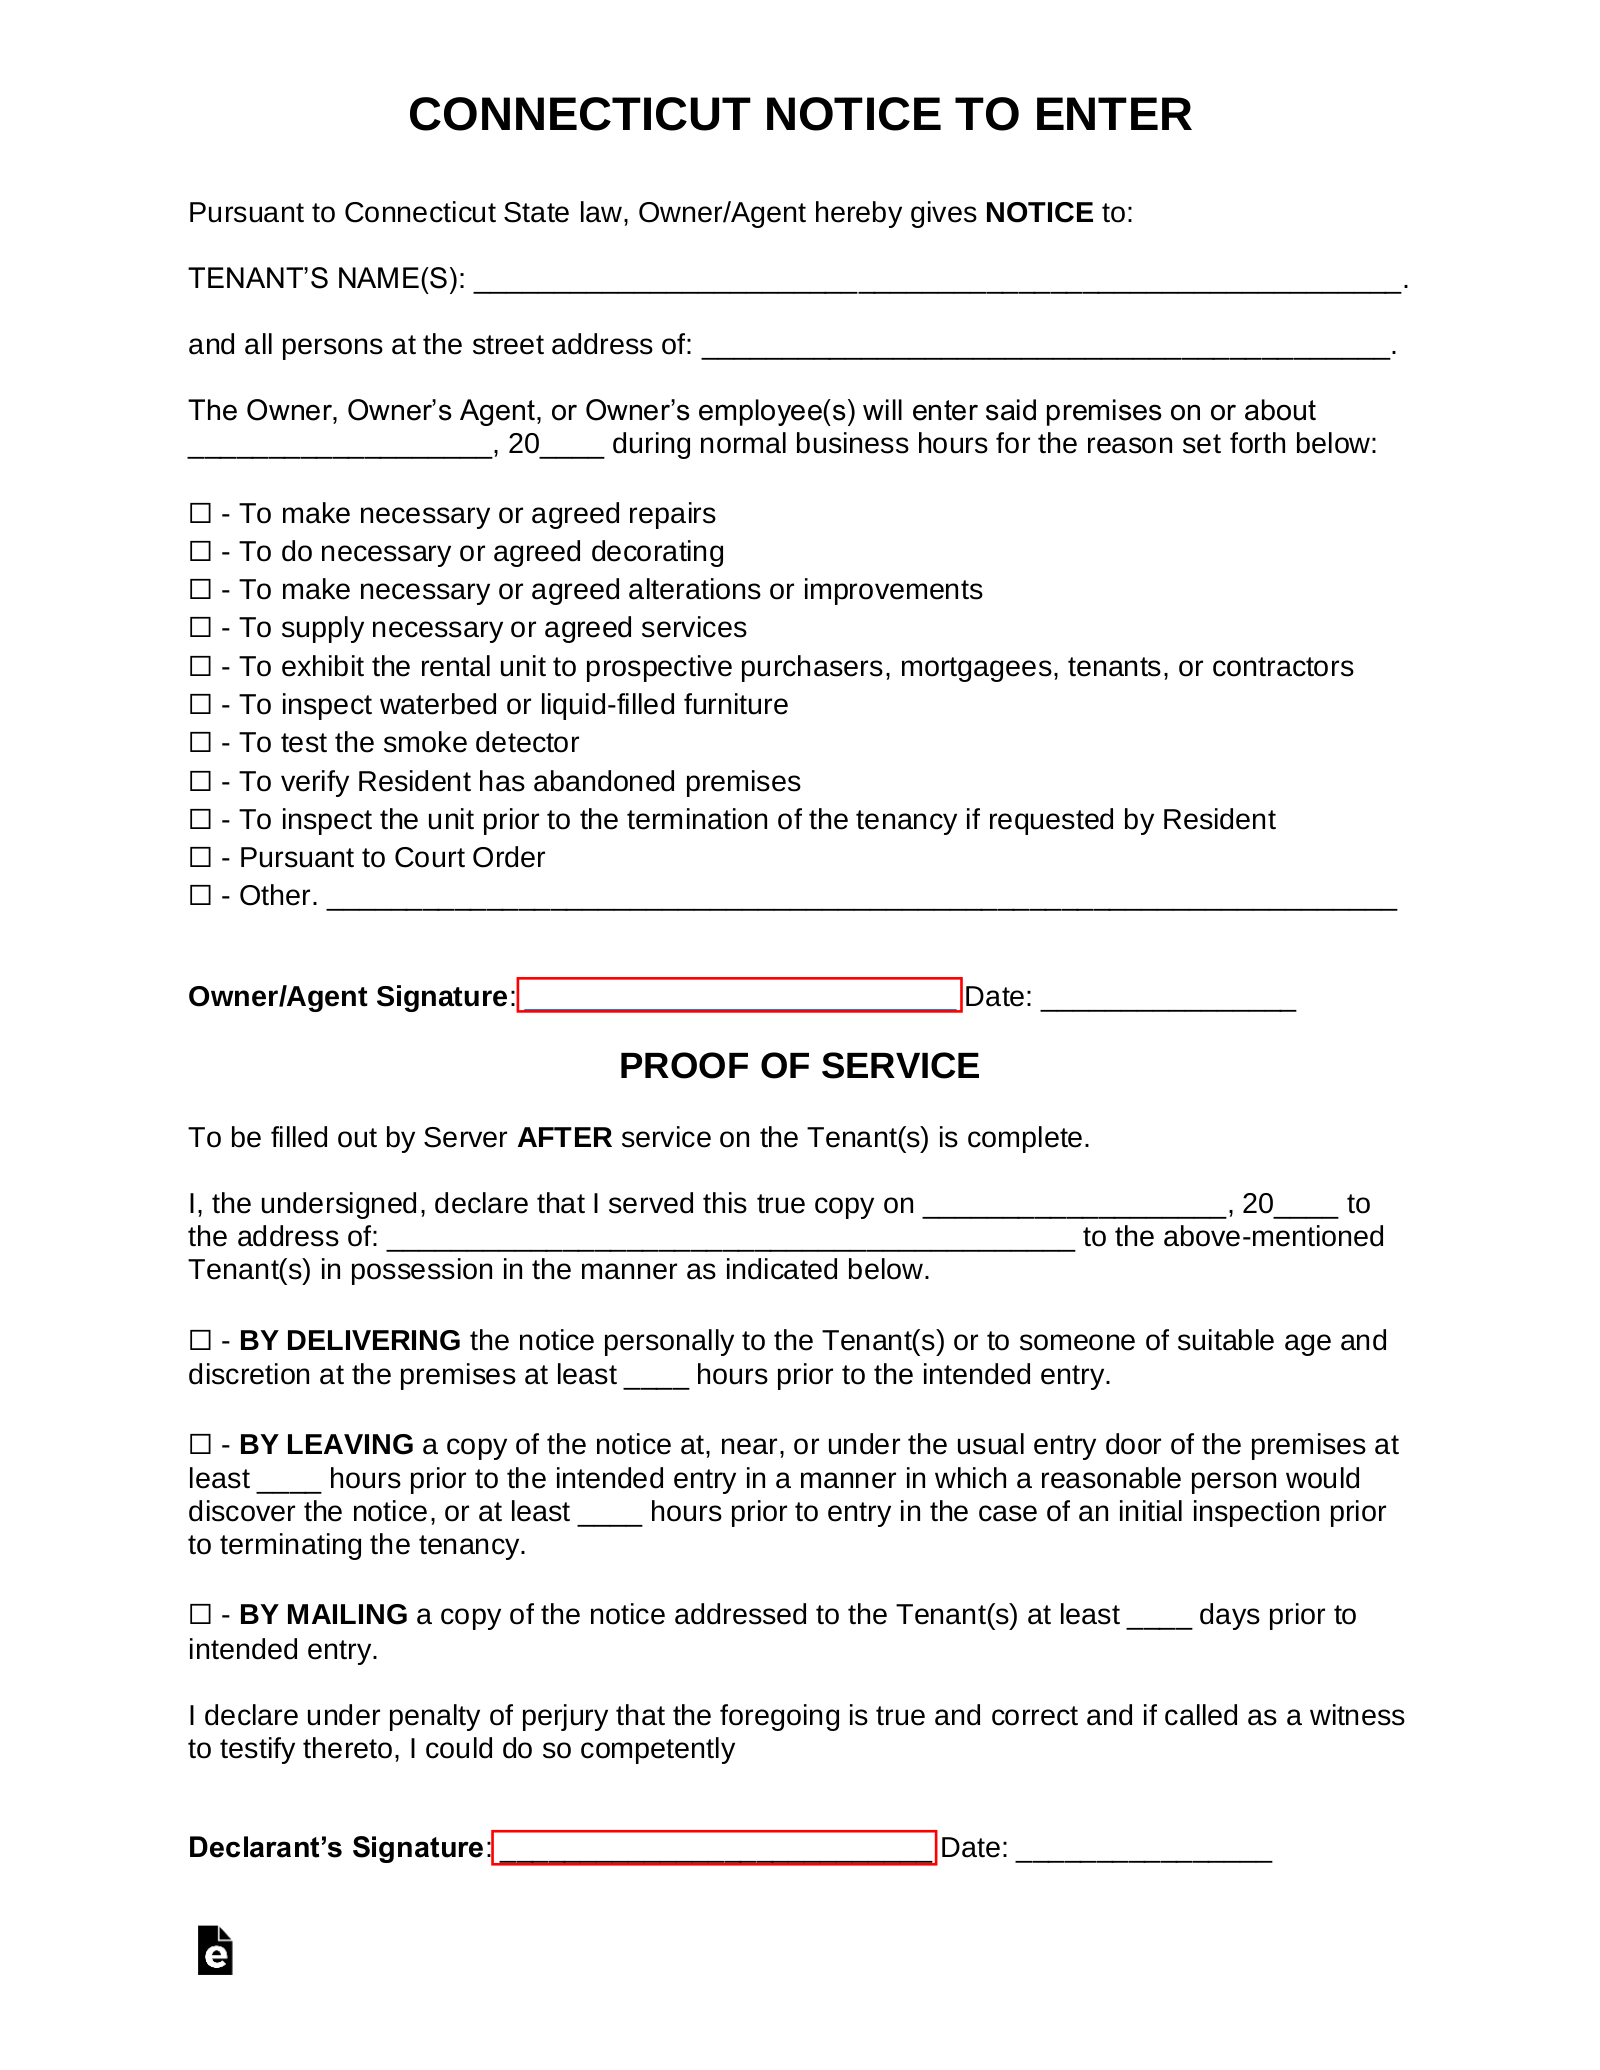 Connecticut Landlord Notice to Enter Form